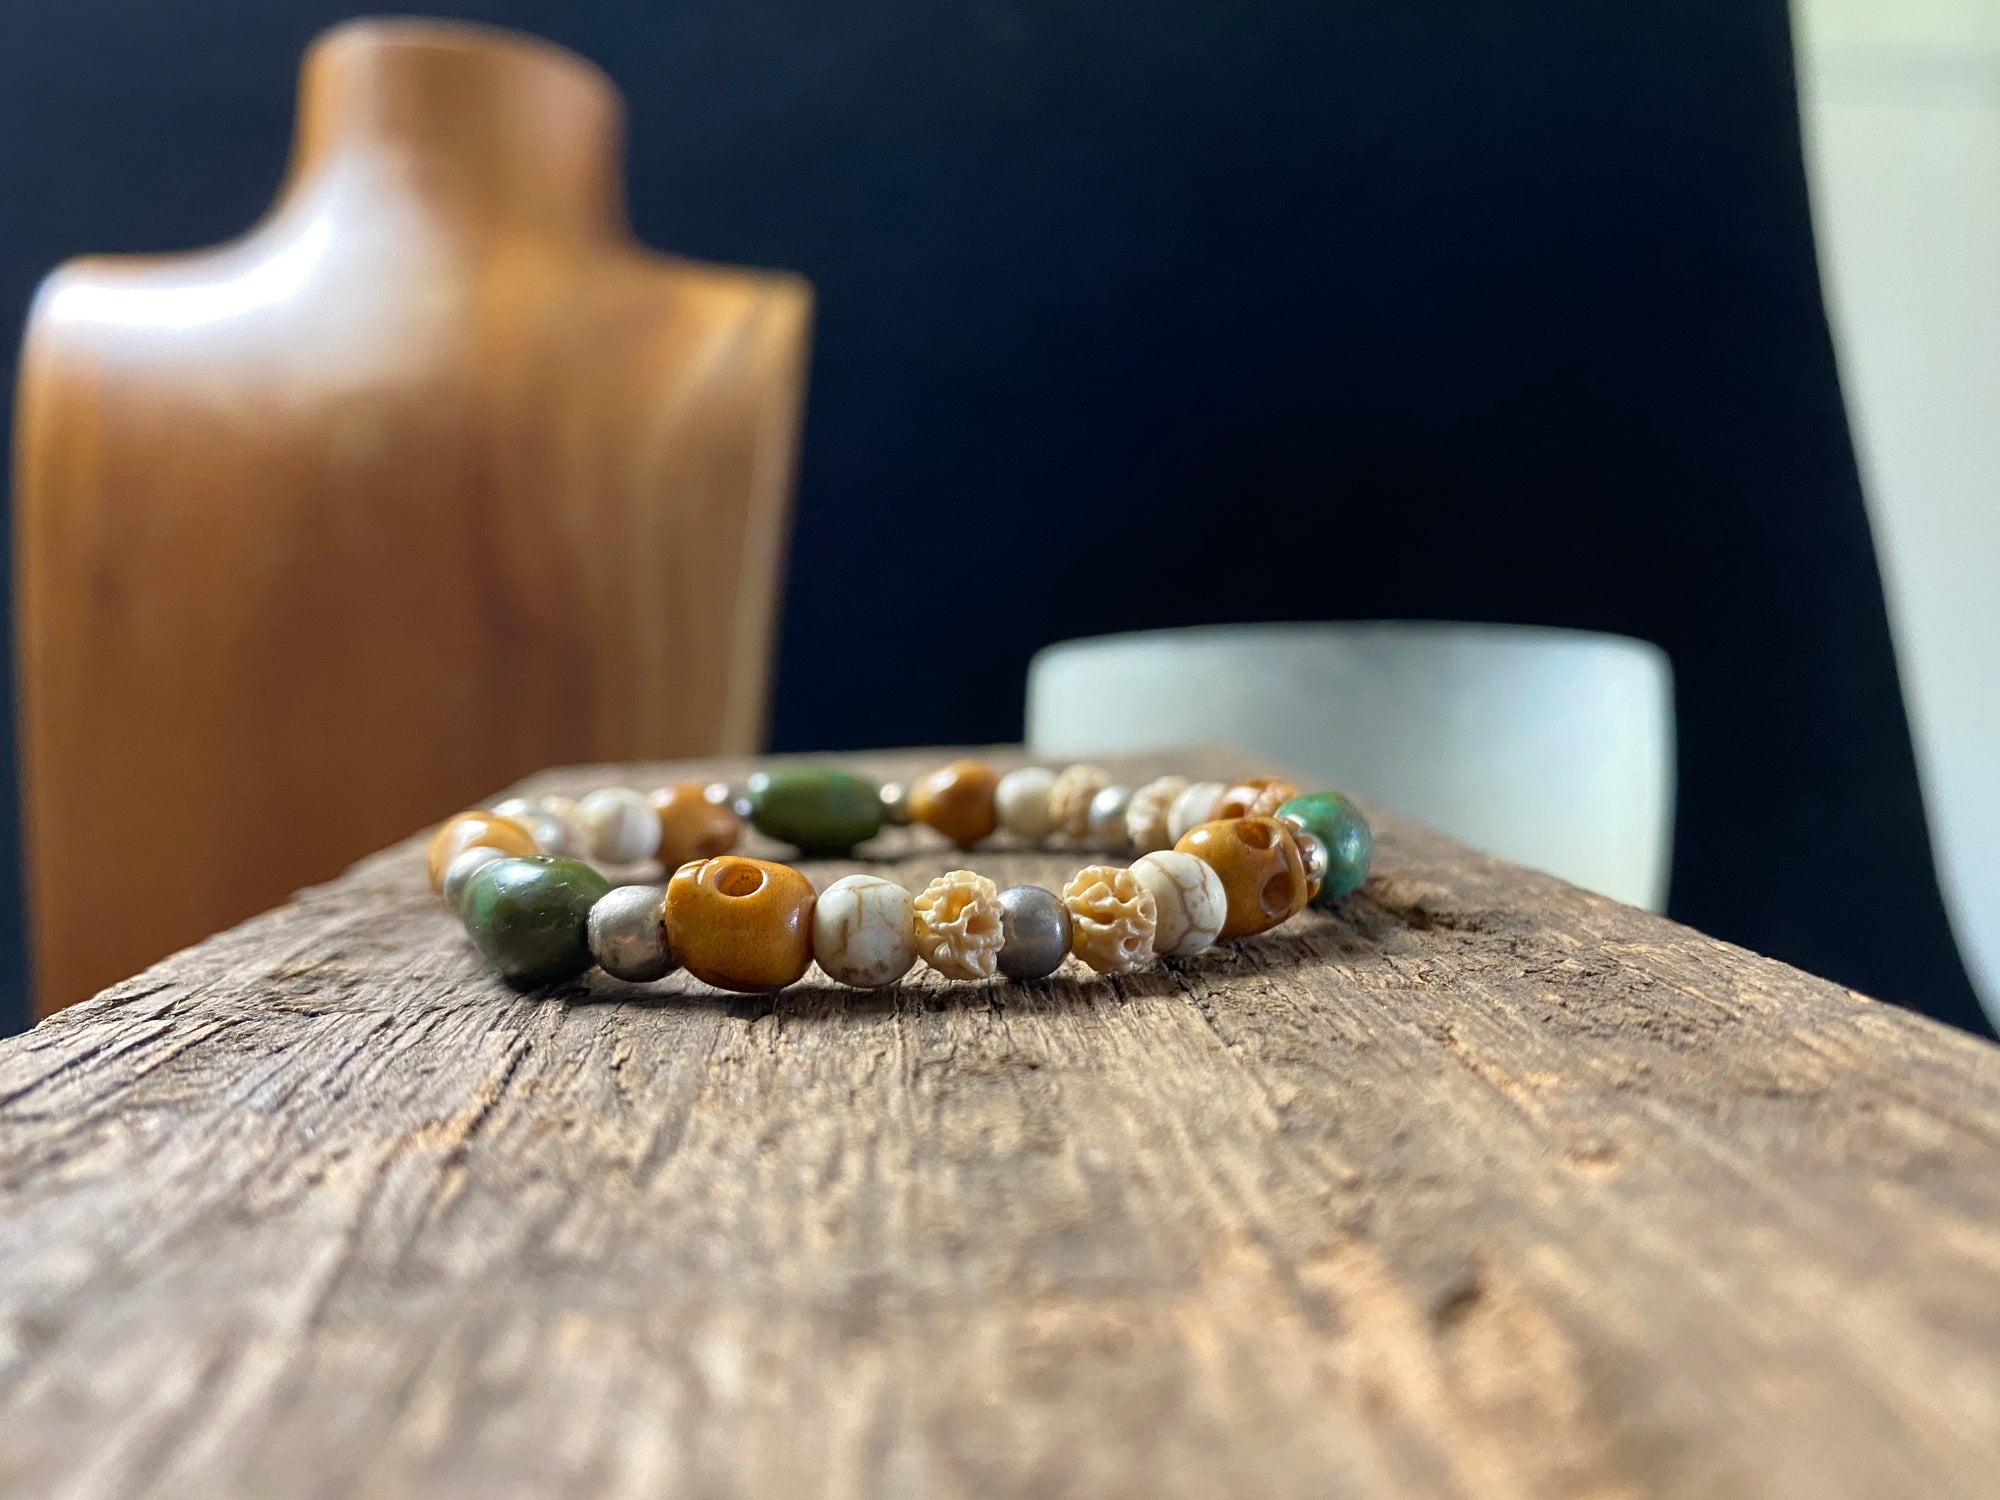 Stretchy bracelet featuring hand carved yak bone skulls, natural antique Tibetan turquoise, undyed howlite , carved lotus root and sterling silver beads. Designed to fit on a wrist 11-14 cm circumference 